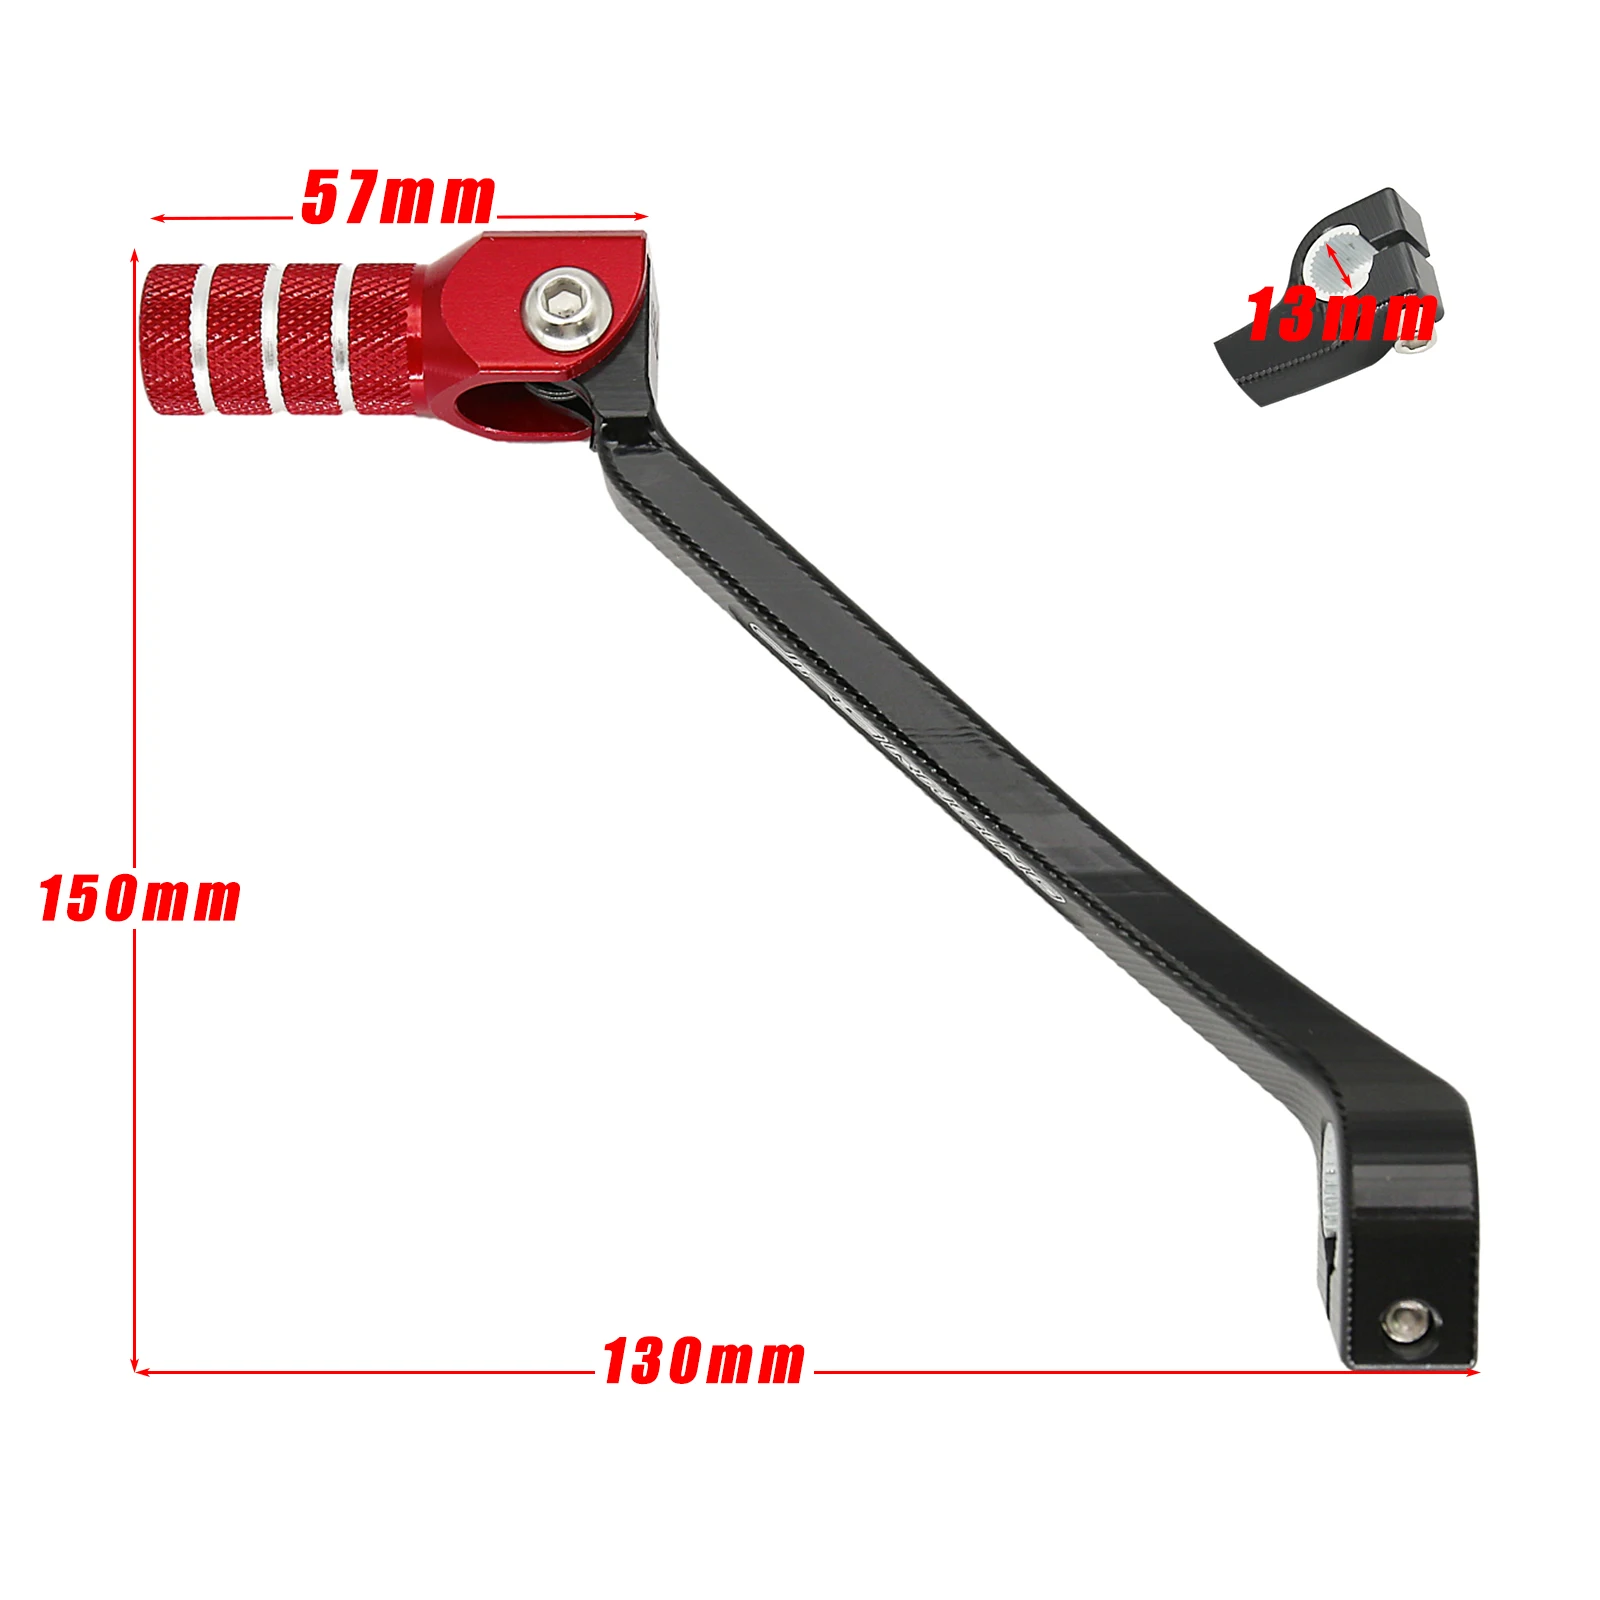 

Motorbike CNC Gear Lever Shift Shifter For Honda CRF450R CRF450RX CRF250R CRF250RX CRF 450R 450RX 250R 250RX 2017 2018 2019